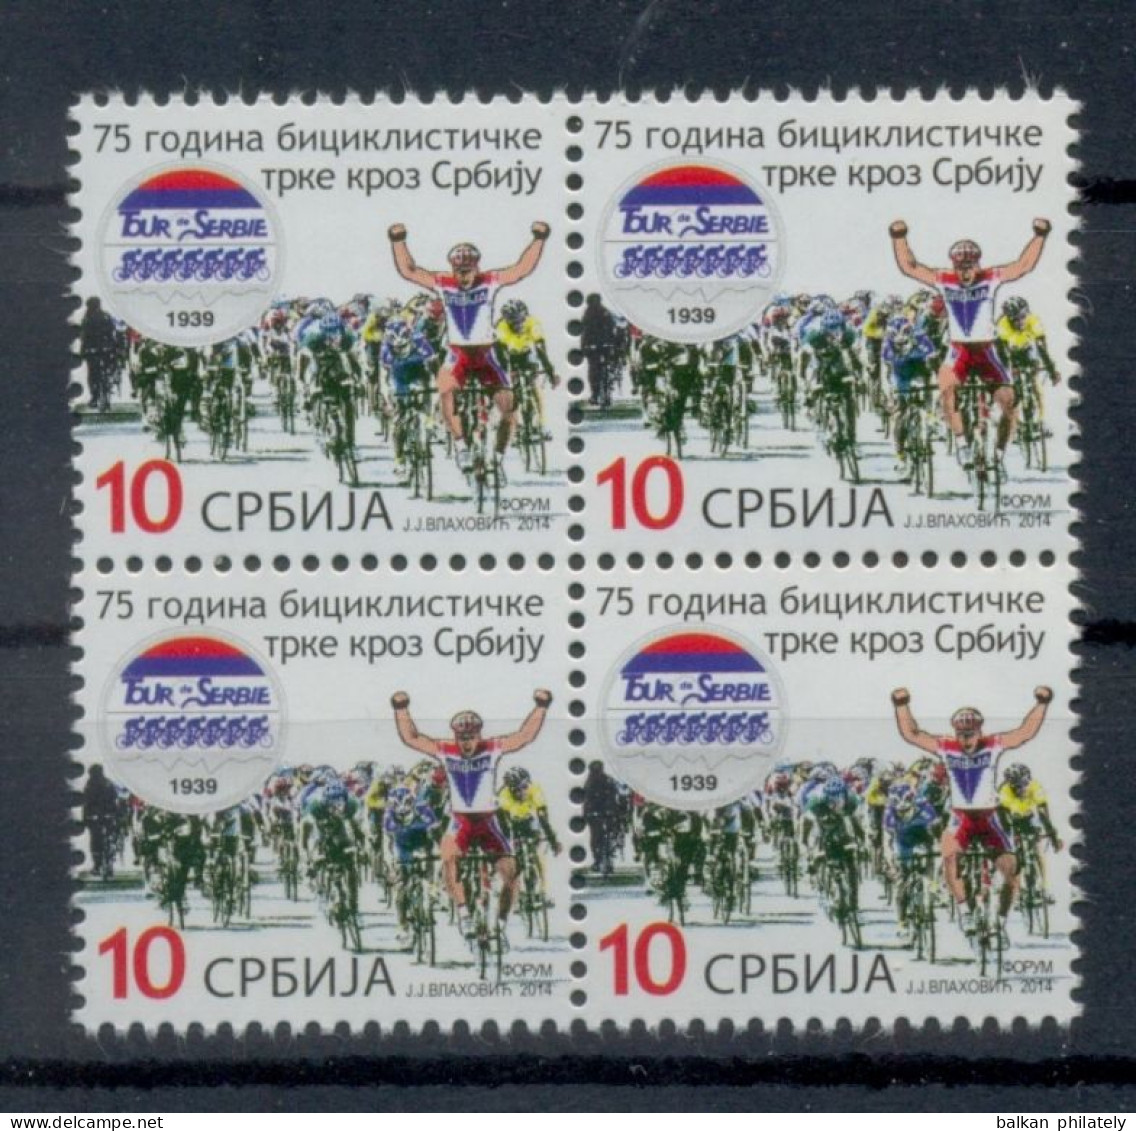 Serbia 2014 75 Years Of Cycling Racing Through Serbia Tour De Serbie Sports Tax Charity Surcharge MNH - Serbie